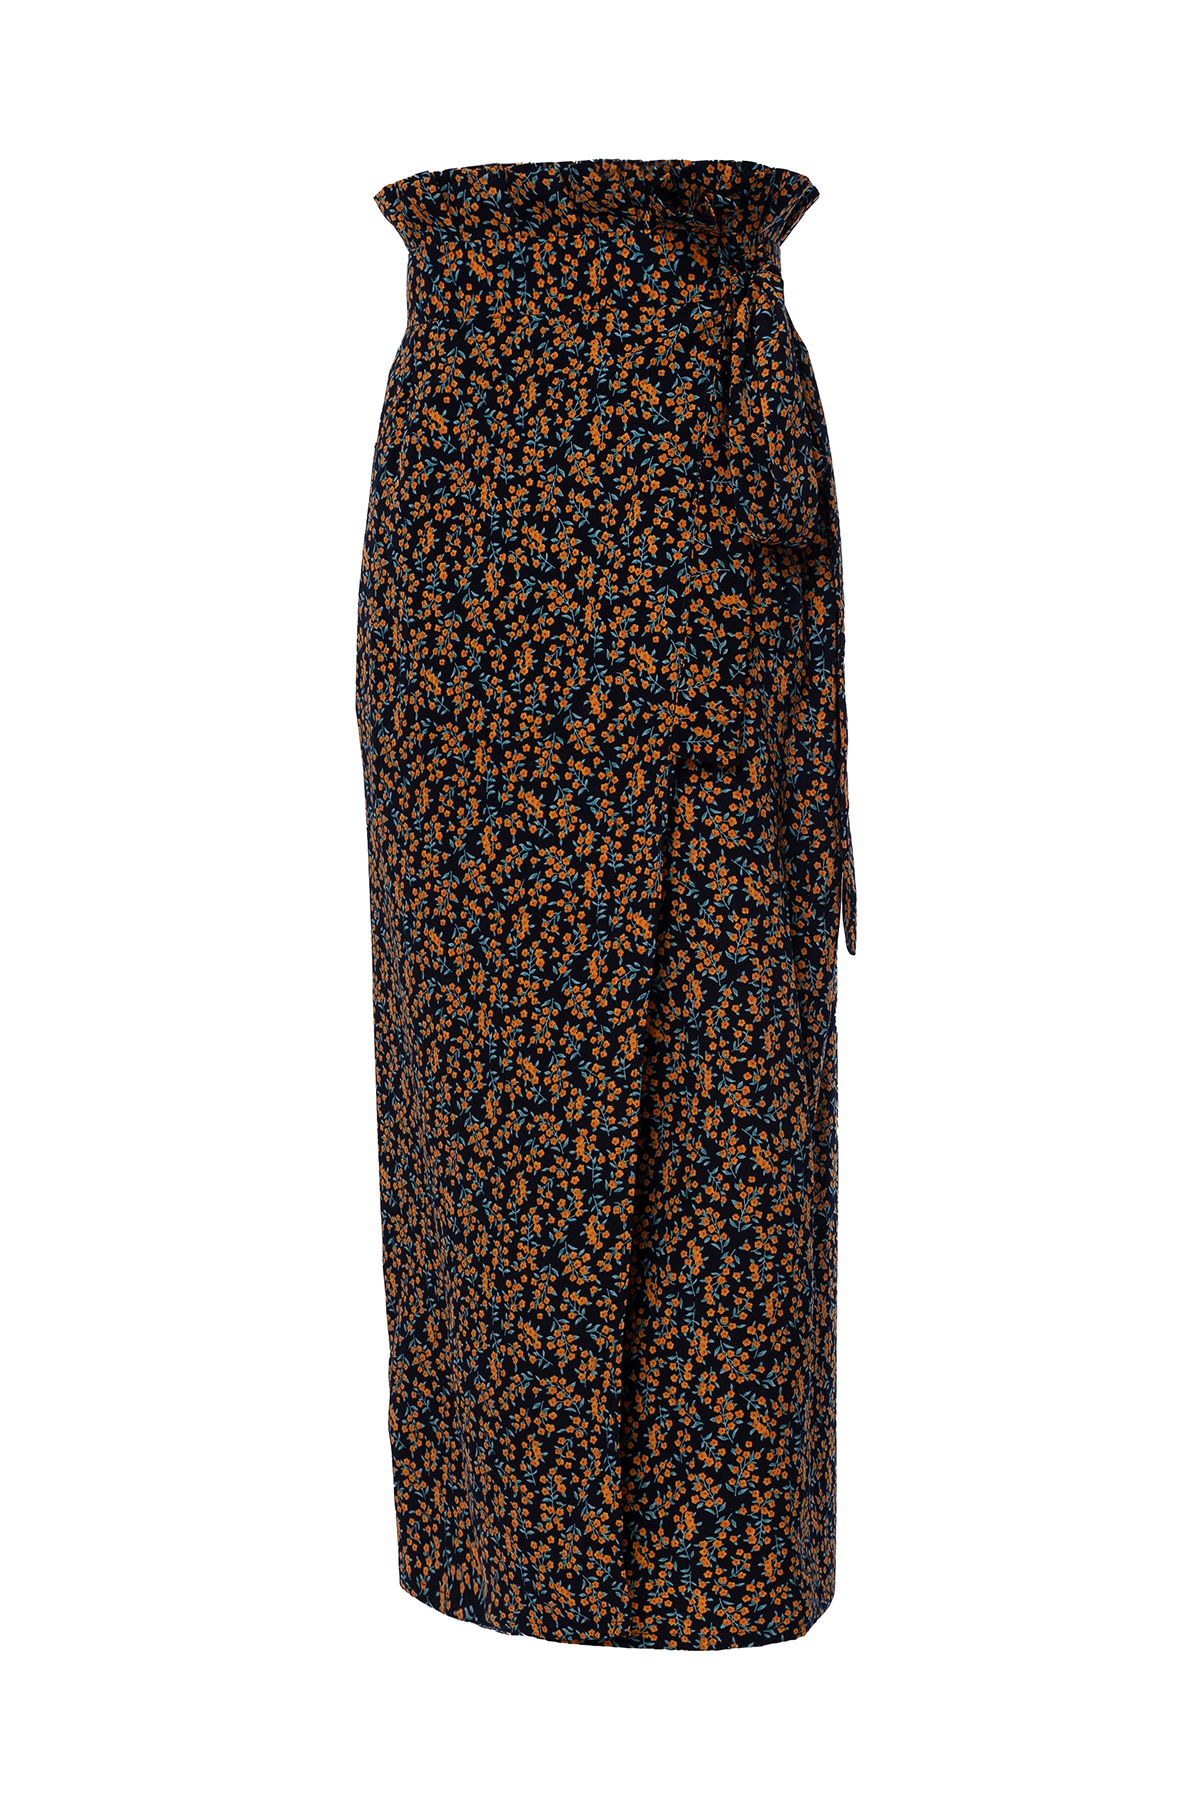 Navy Wrap Skirt with Floral Pattern